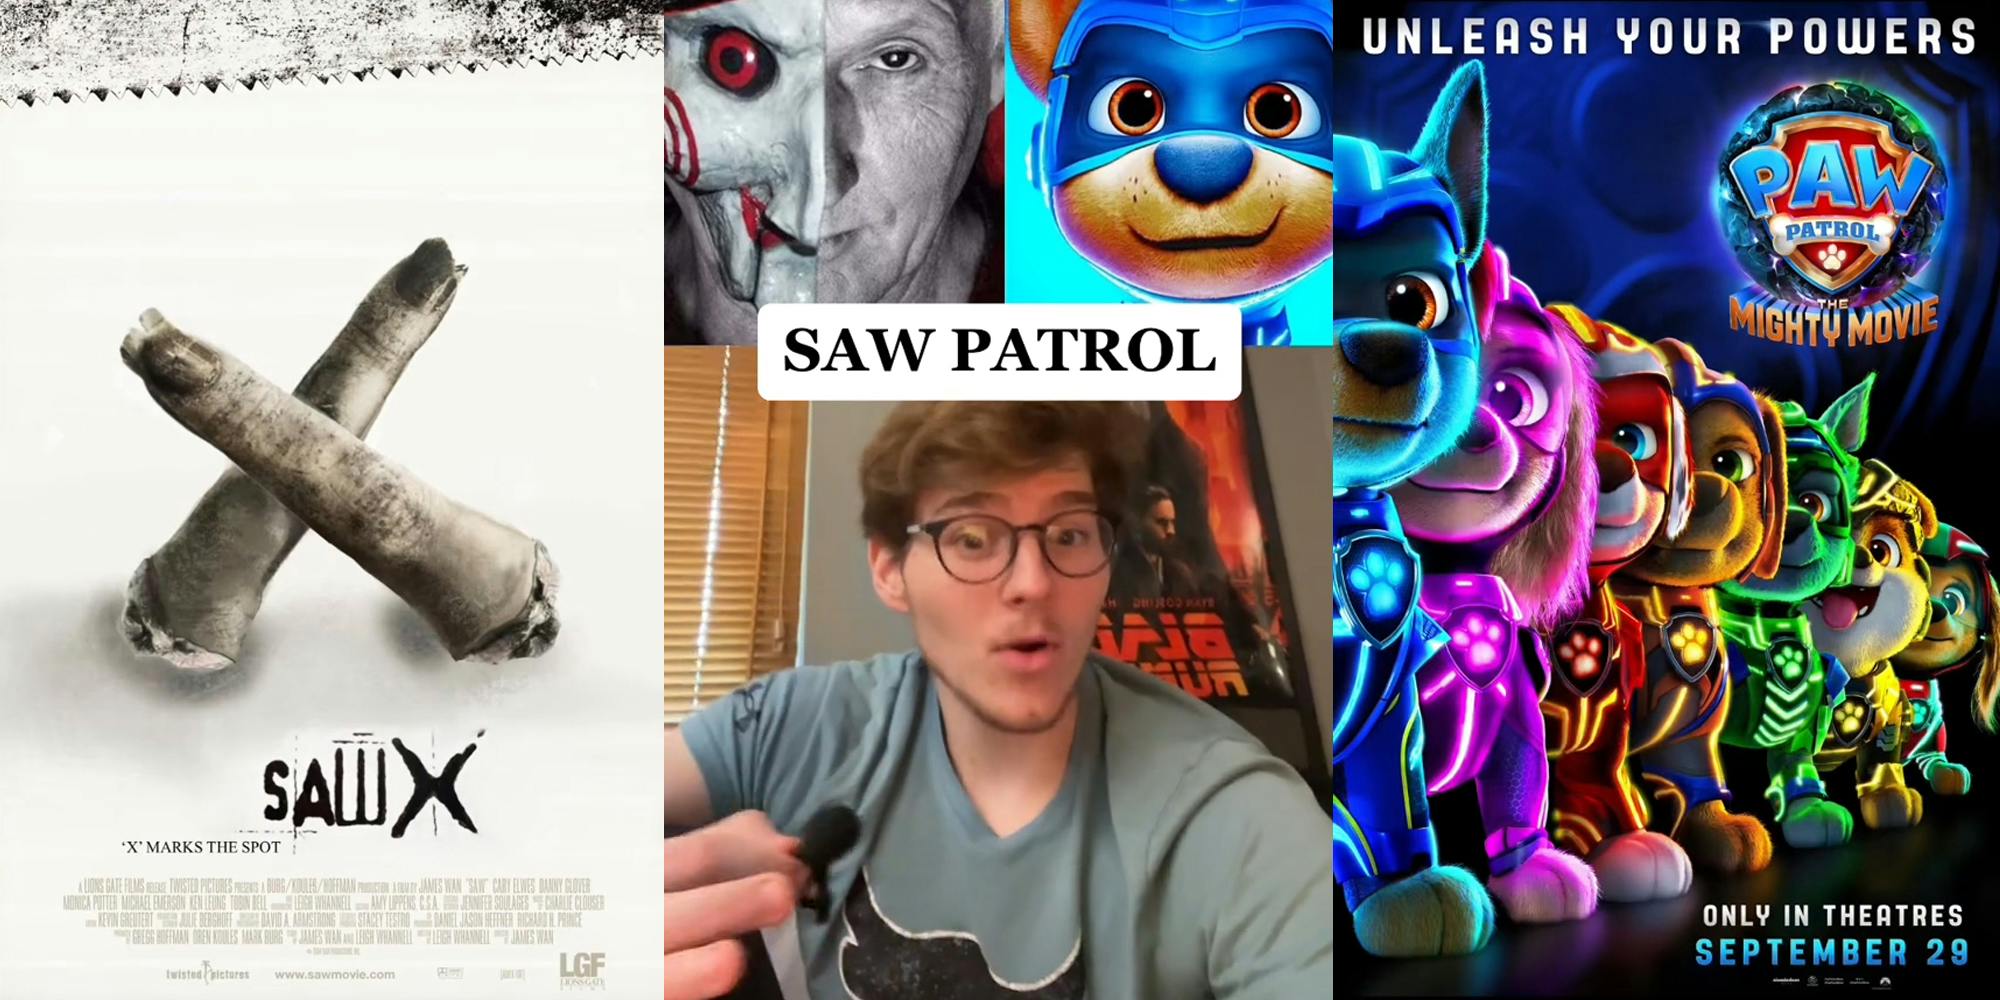 Saw X poster (l) TikToker speaking into mic with Saw and Paw Patrol images above with caption "SAW PATROL" (c) Paw Patrol the Mighty Movie poster (r)